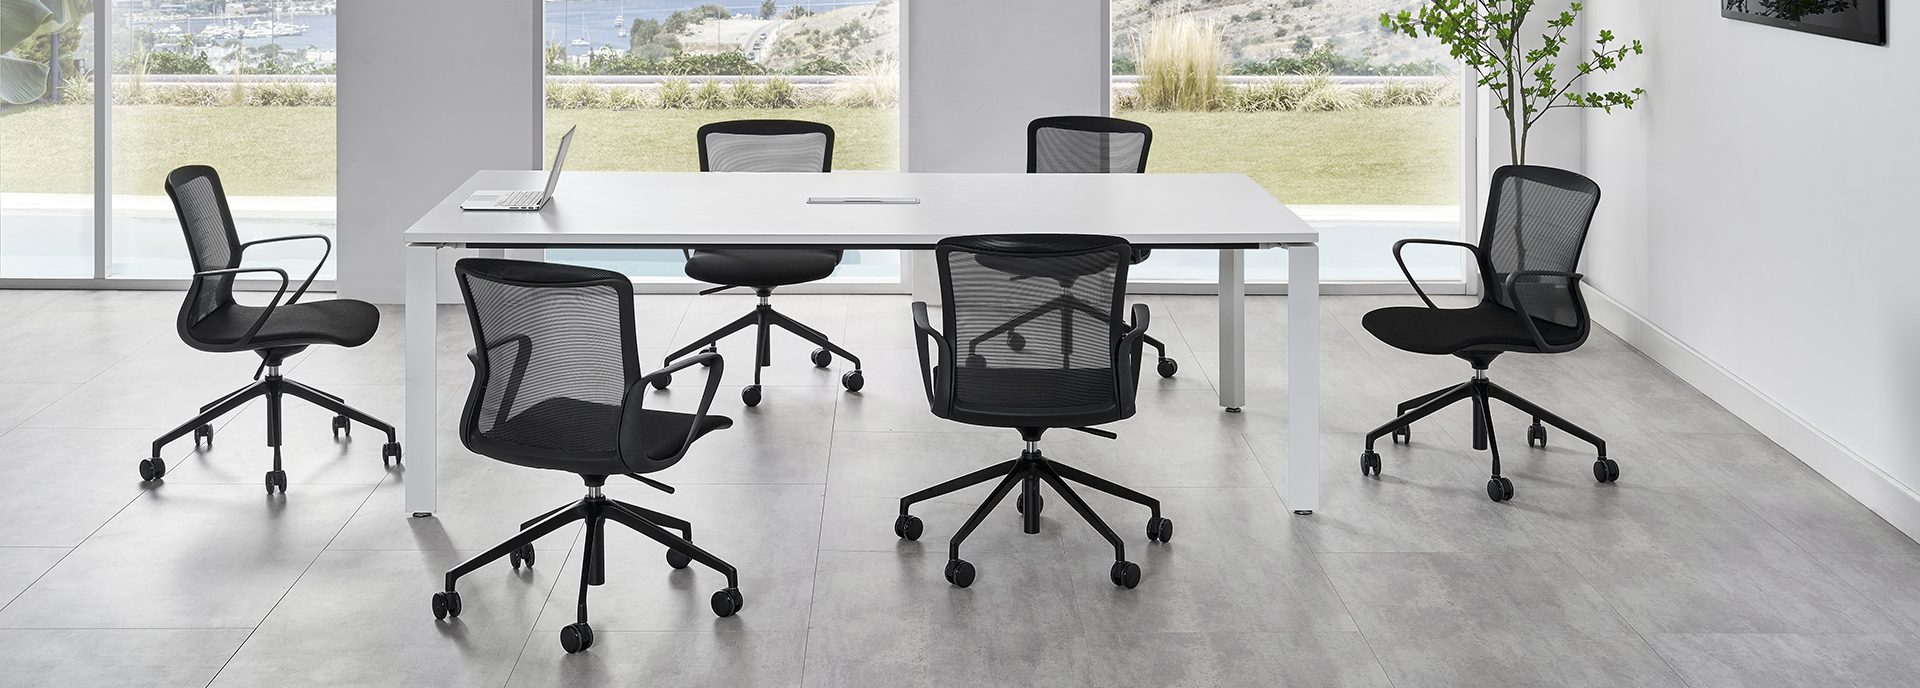 Mesh-back multi-purpose Keen Chairs around conference table